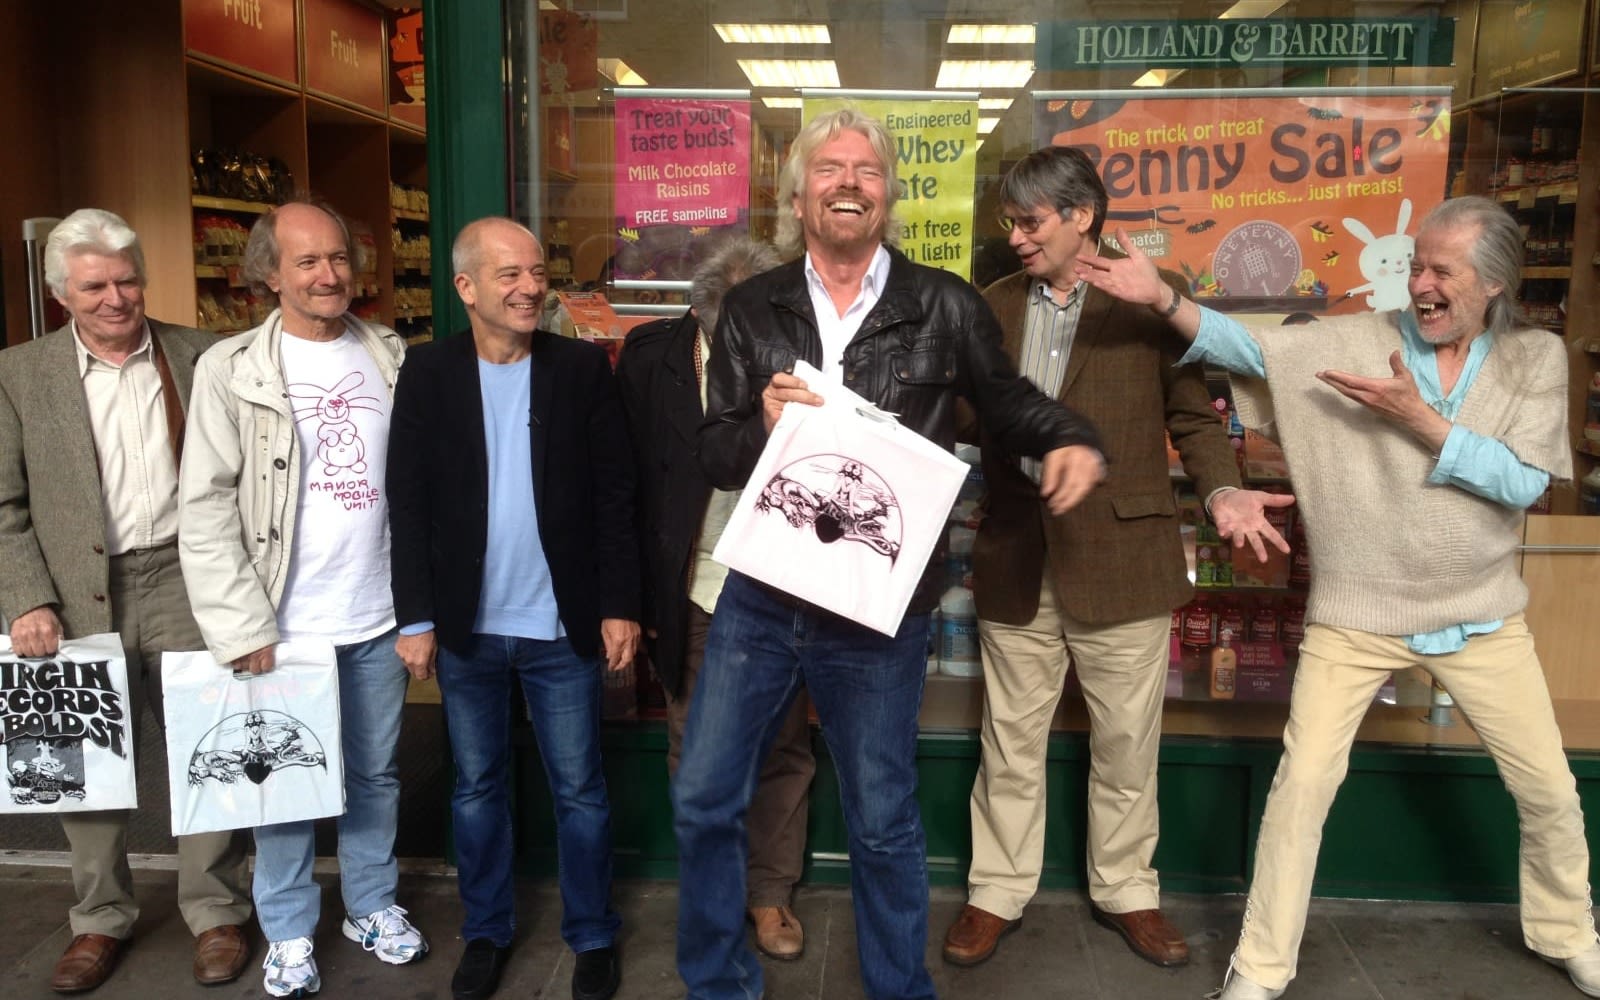 Richard Branson smiling with 6 other men laughing and standing in front of a shop